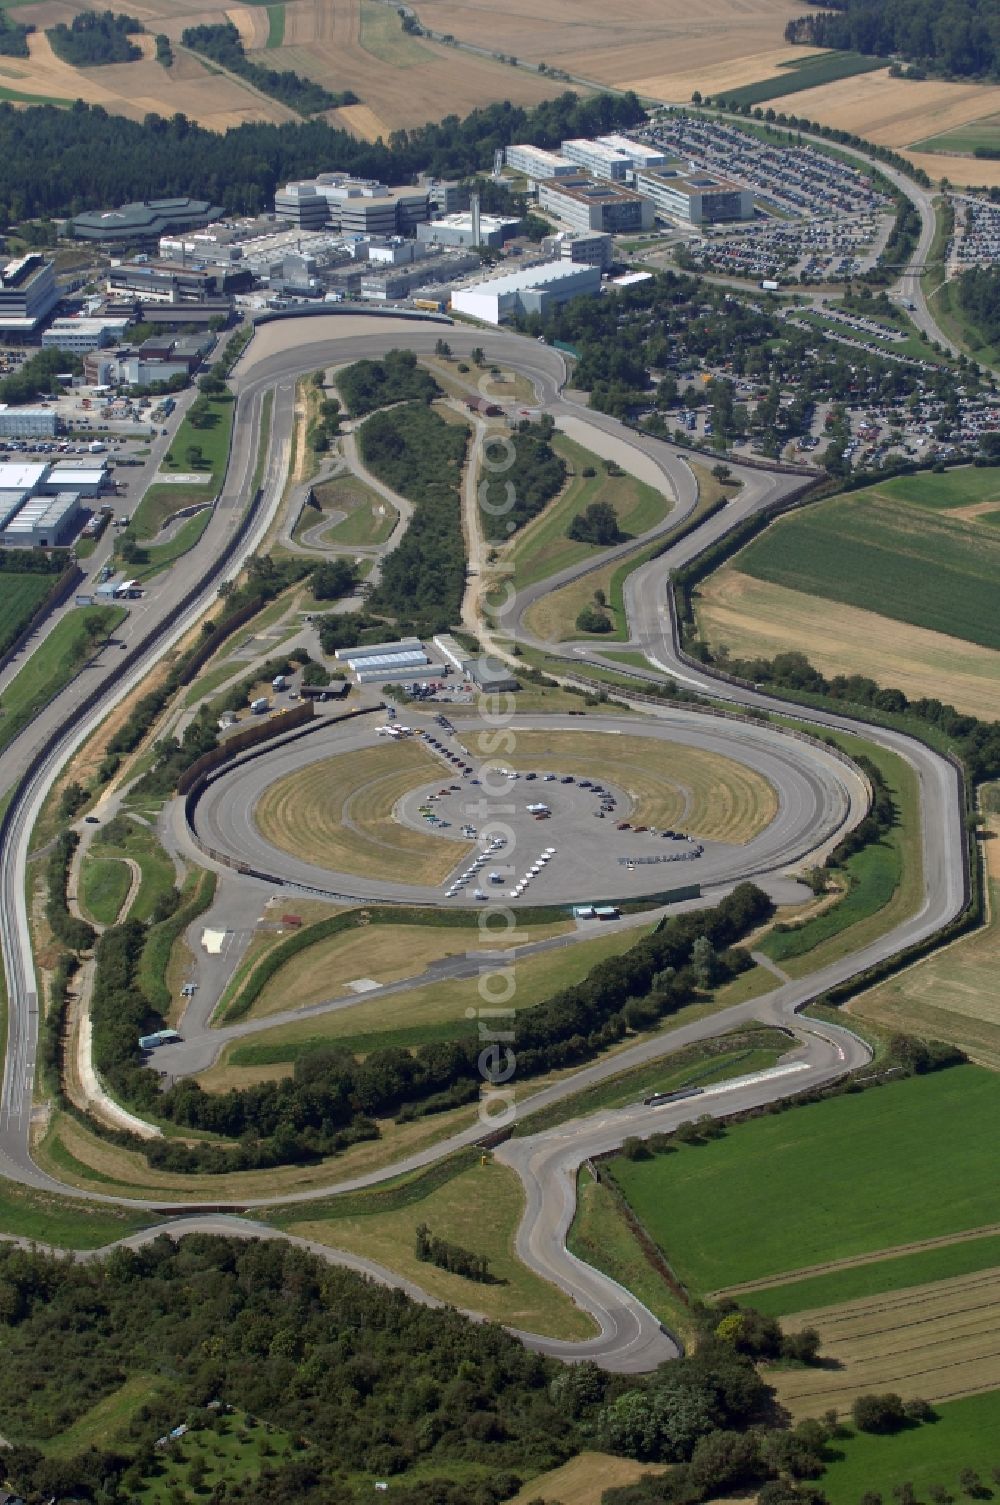 Aerial image Weissach - Test track and practice area in the driving safety center of Porsche Entwicklungszentrum in Weissach in the state Baden-Wuerttemberg, Germany